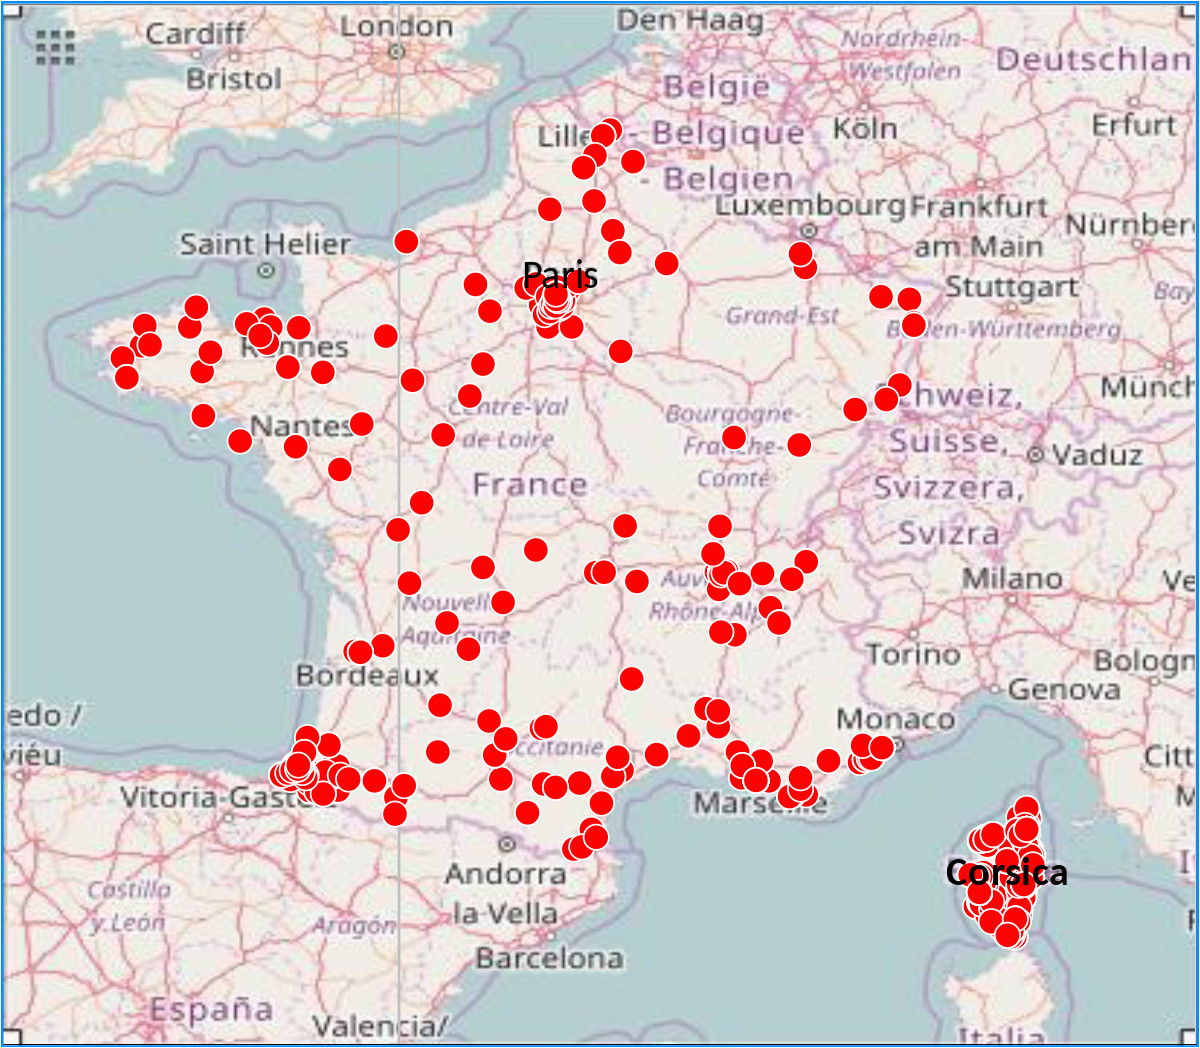 Paris France Airports Map List Of Terrorist Incidents In France Wikipedia Of Paris France Airports Map 